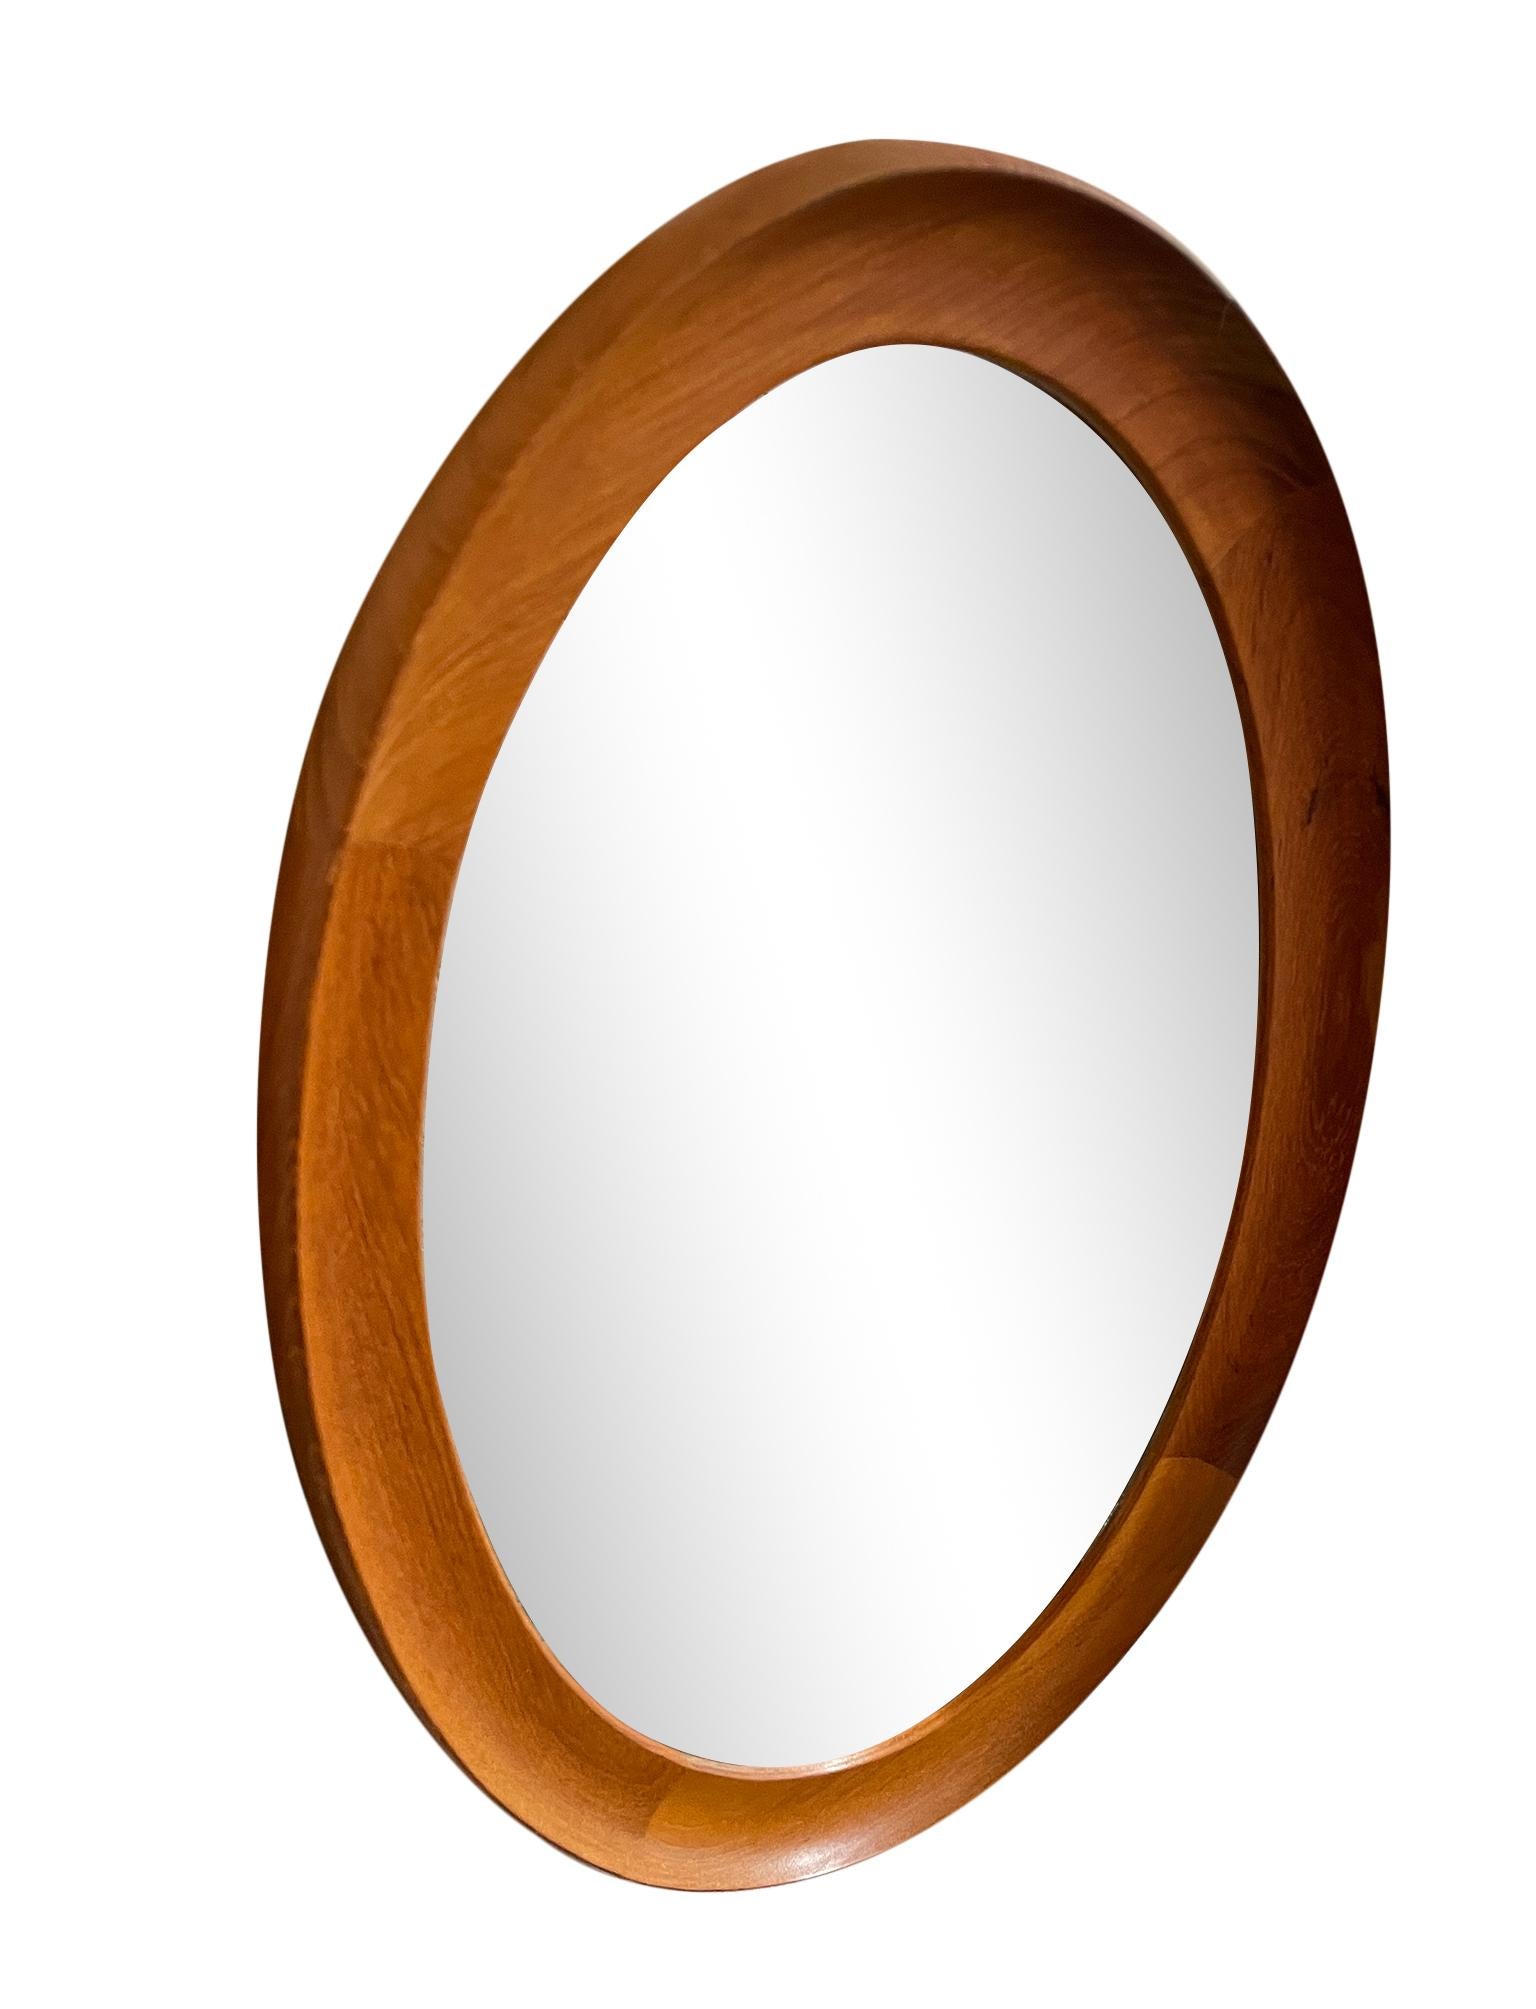 Beautiful petite oval teak Danish wall mirror made in Denmark. Labeled on Back - Stamped number 306. has small brass hanger. Located in Brooklyn NYC. Clean Mirror Circa 1960

Dimensions: 25